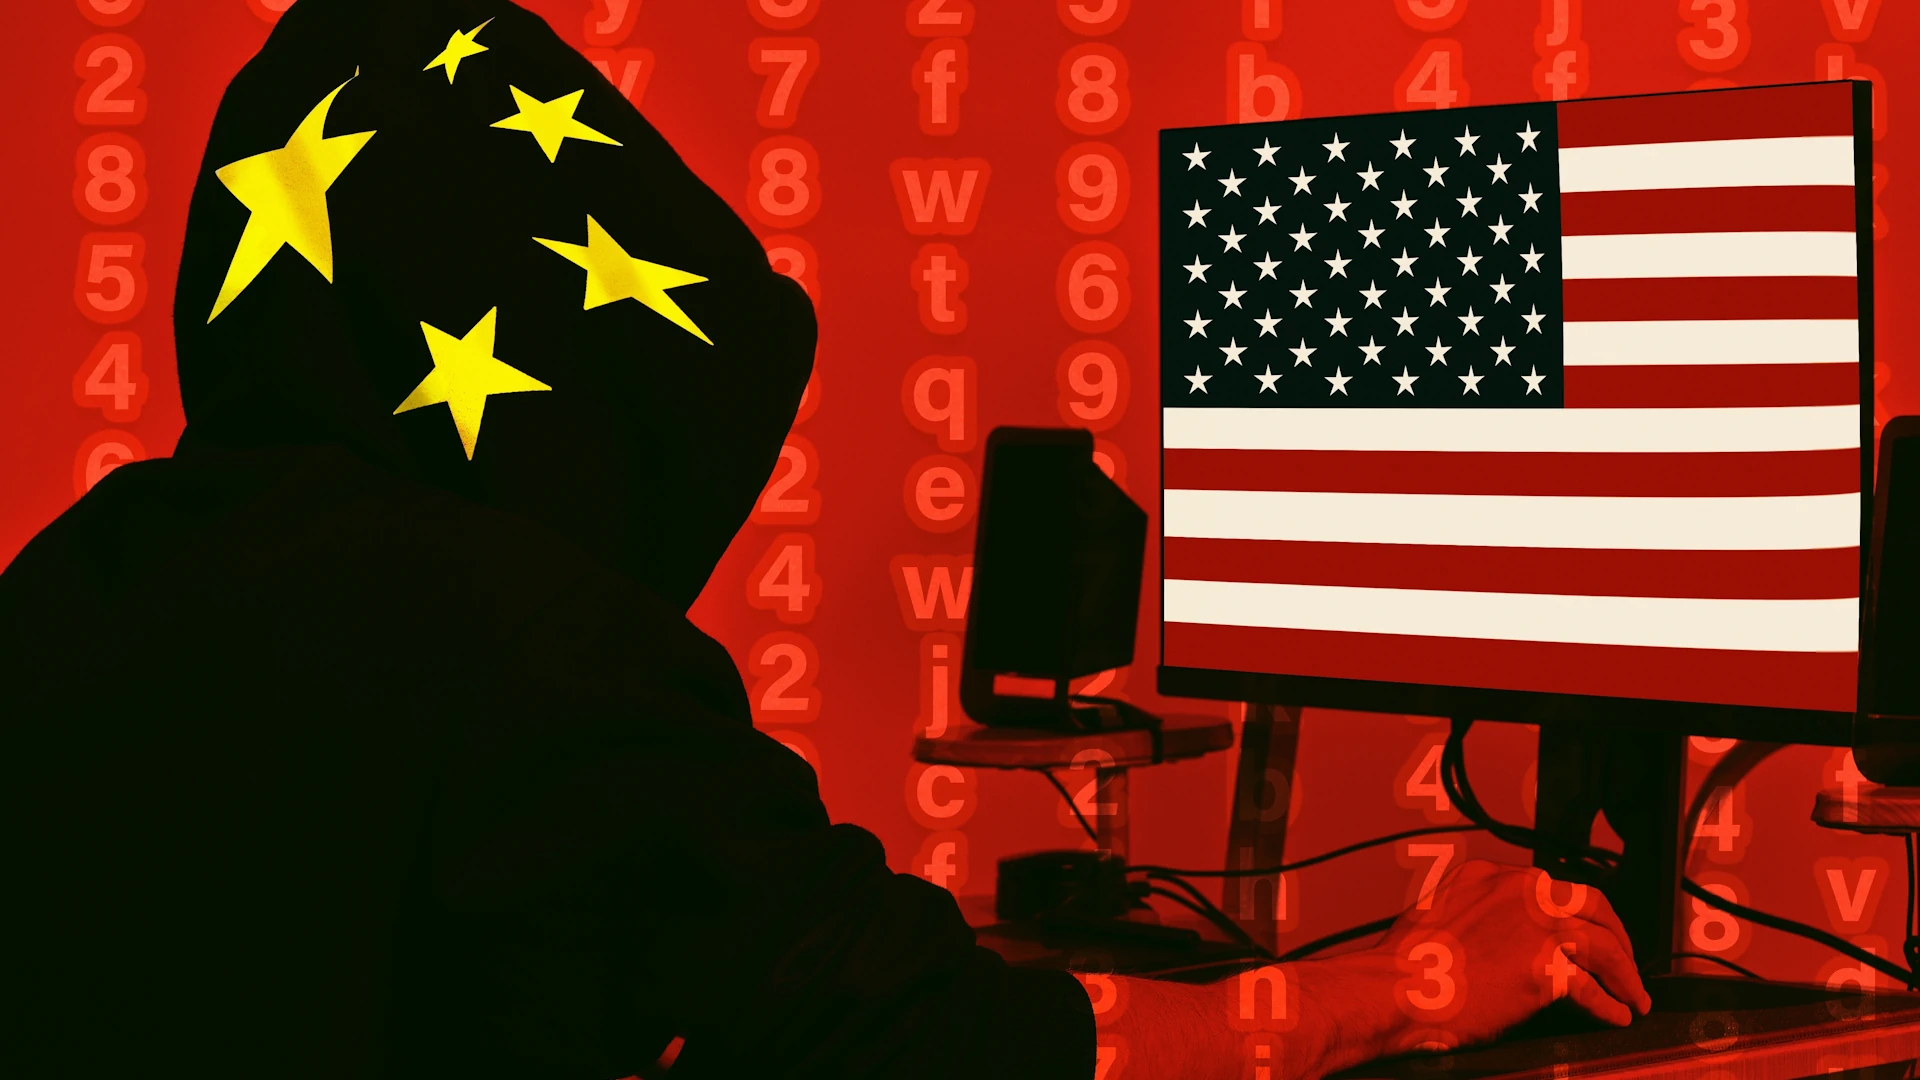 The Chinese are reportedly targeting US infrastructure in the latest wave of cyberattacks